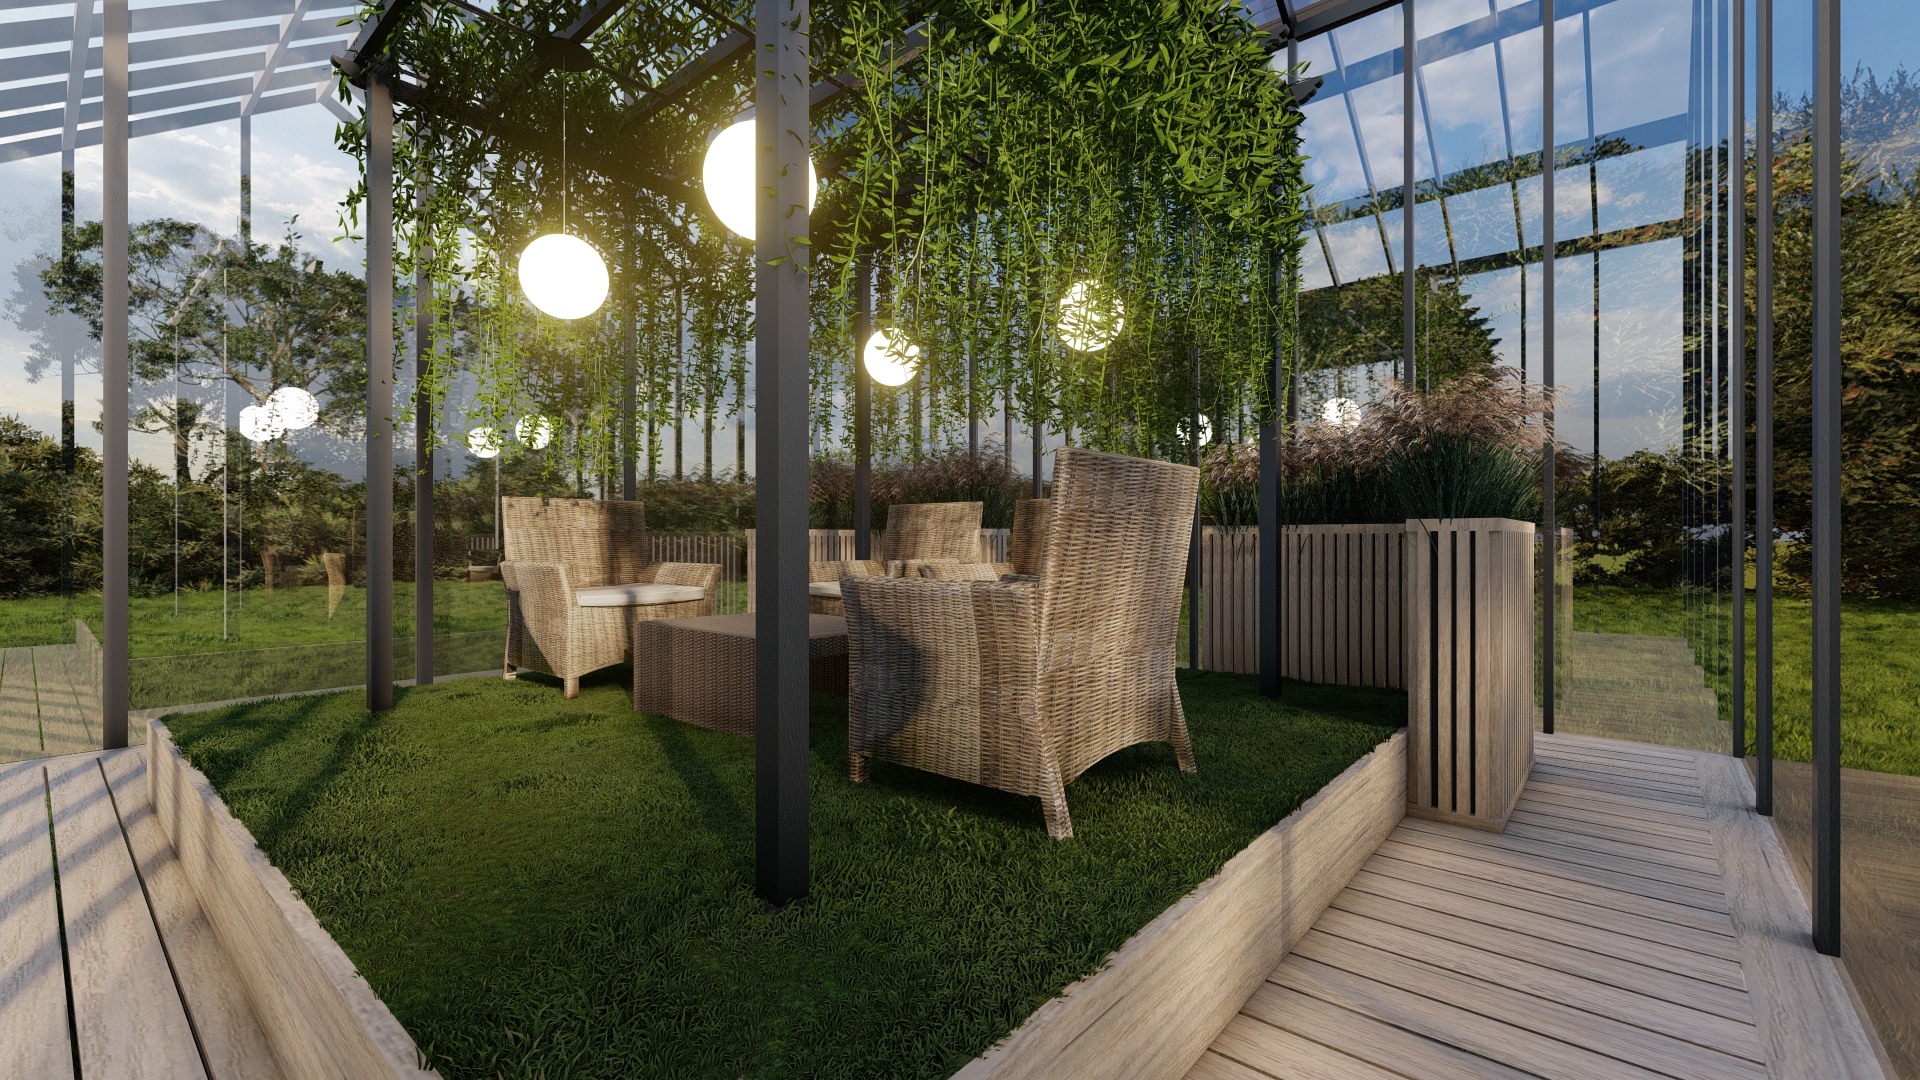 The new Hotel will offer an indoor/outdoor space where you can say goodbye to your beloved companion in a warm, quiet space. 